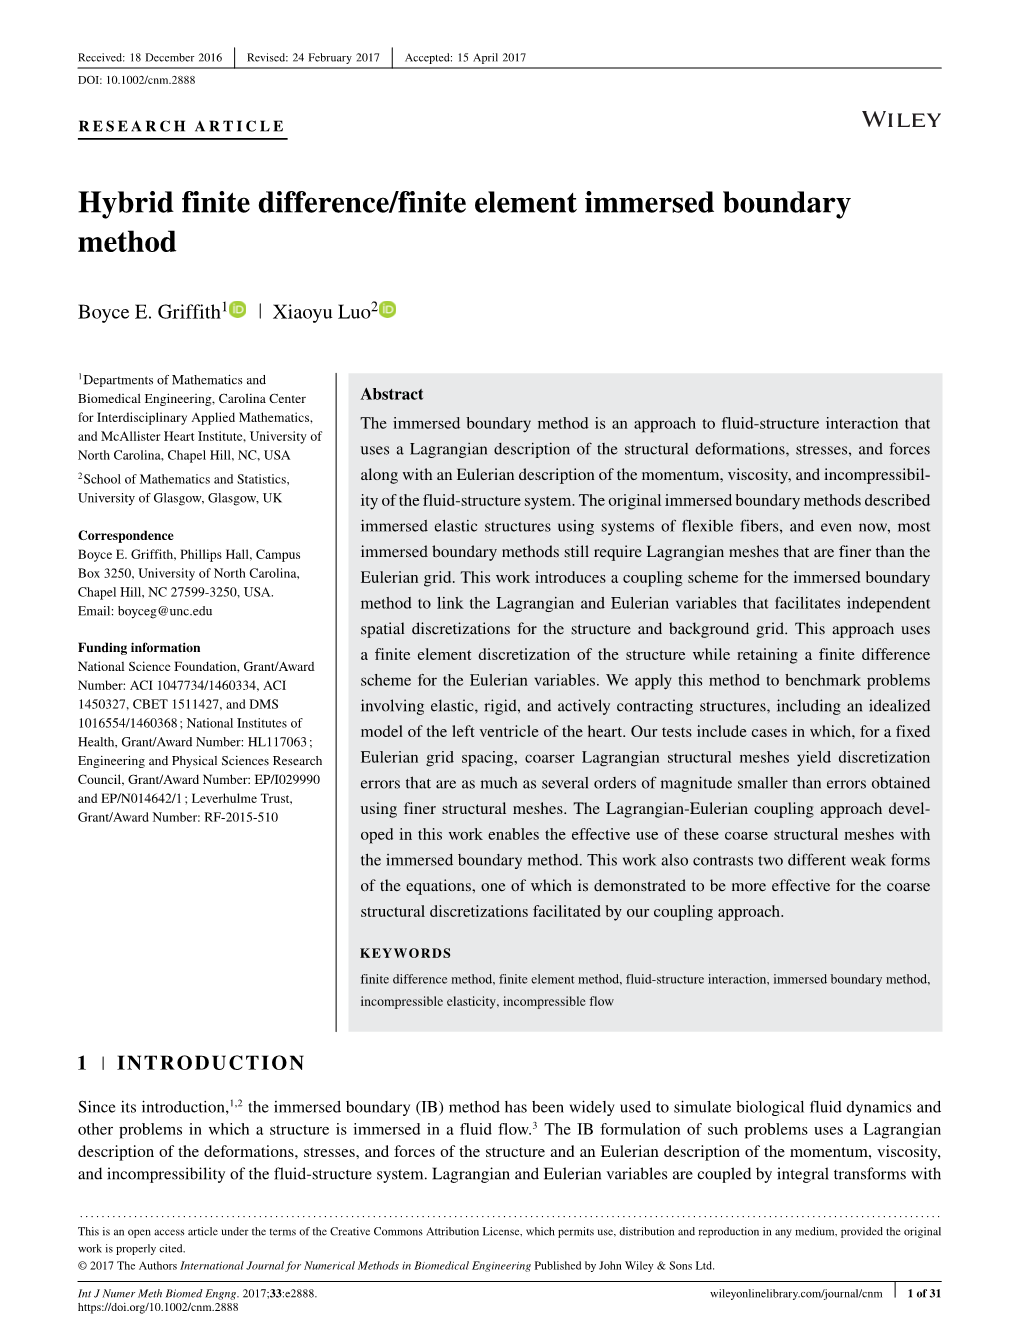 Hybrid Finite Difference/Finite Element Immersed Boundary Method